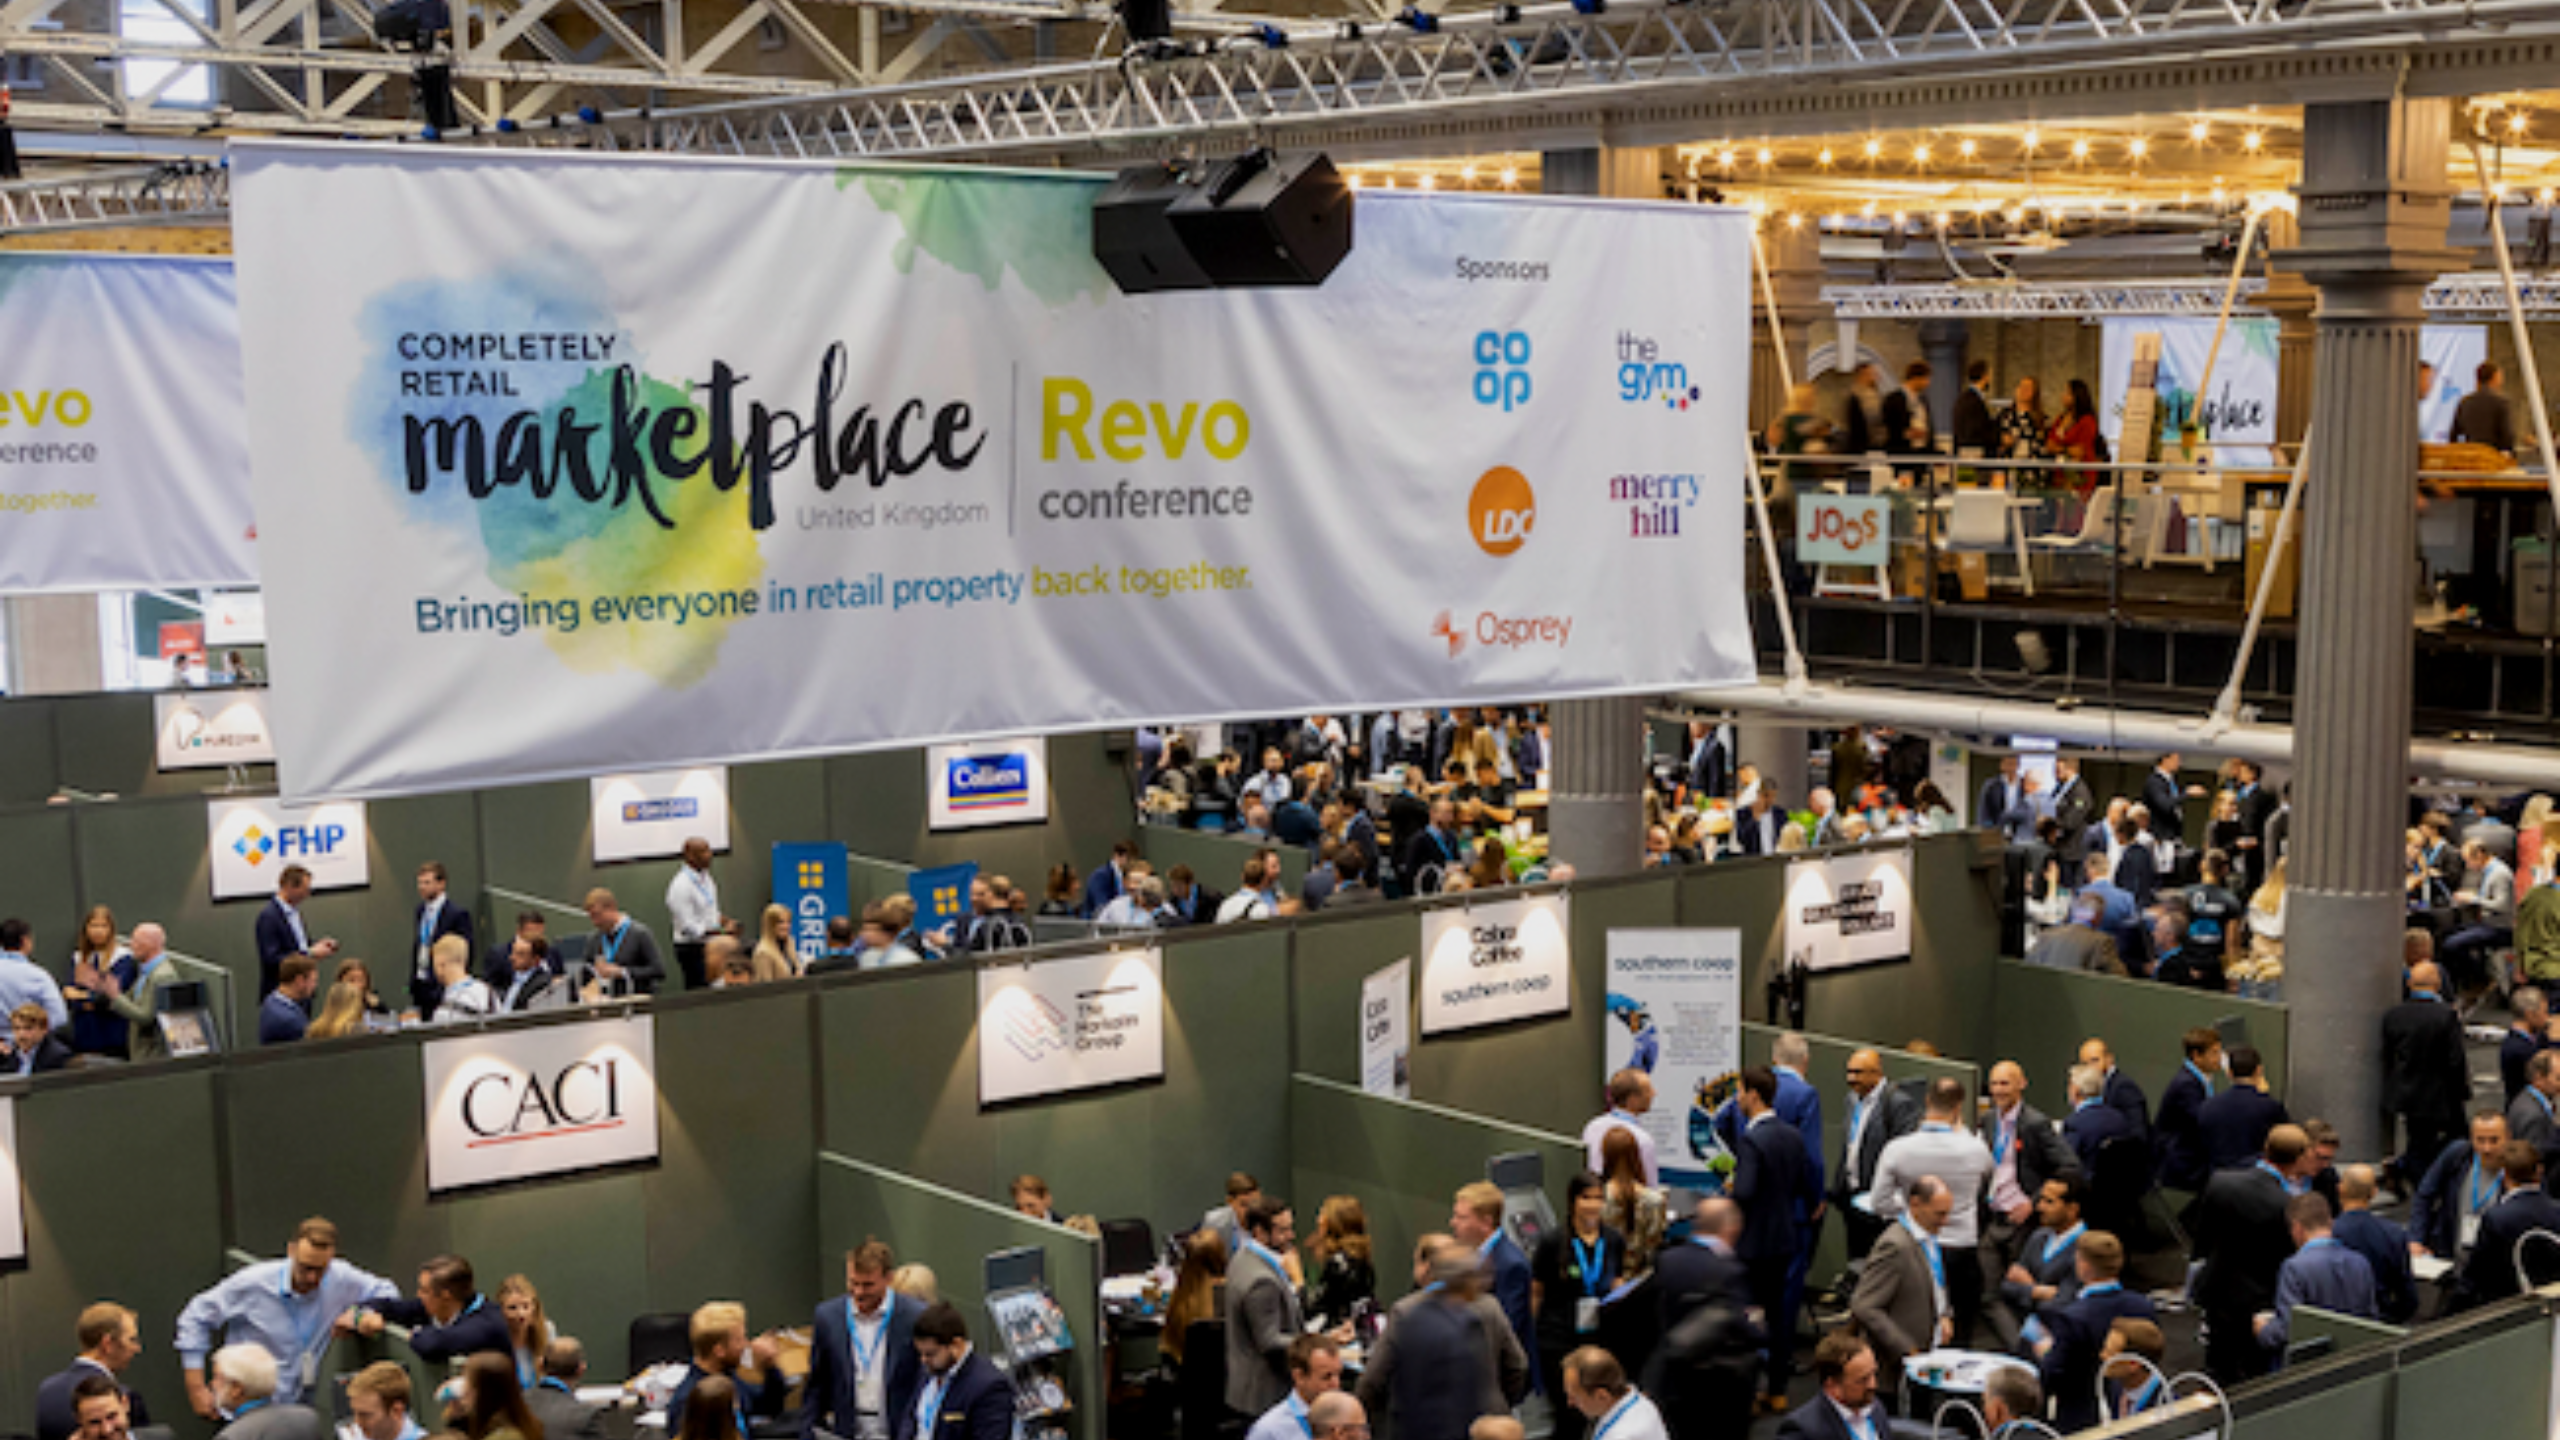 Completely Retail Marketplace | Revo Conference, The UK’s largest Retail Property event